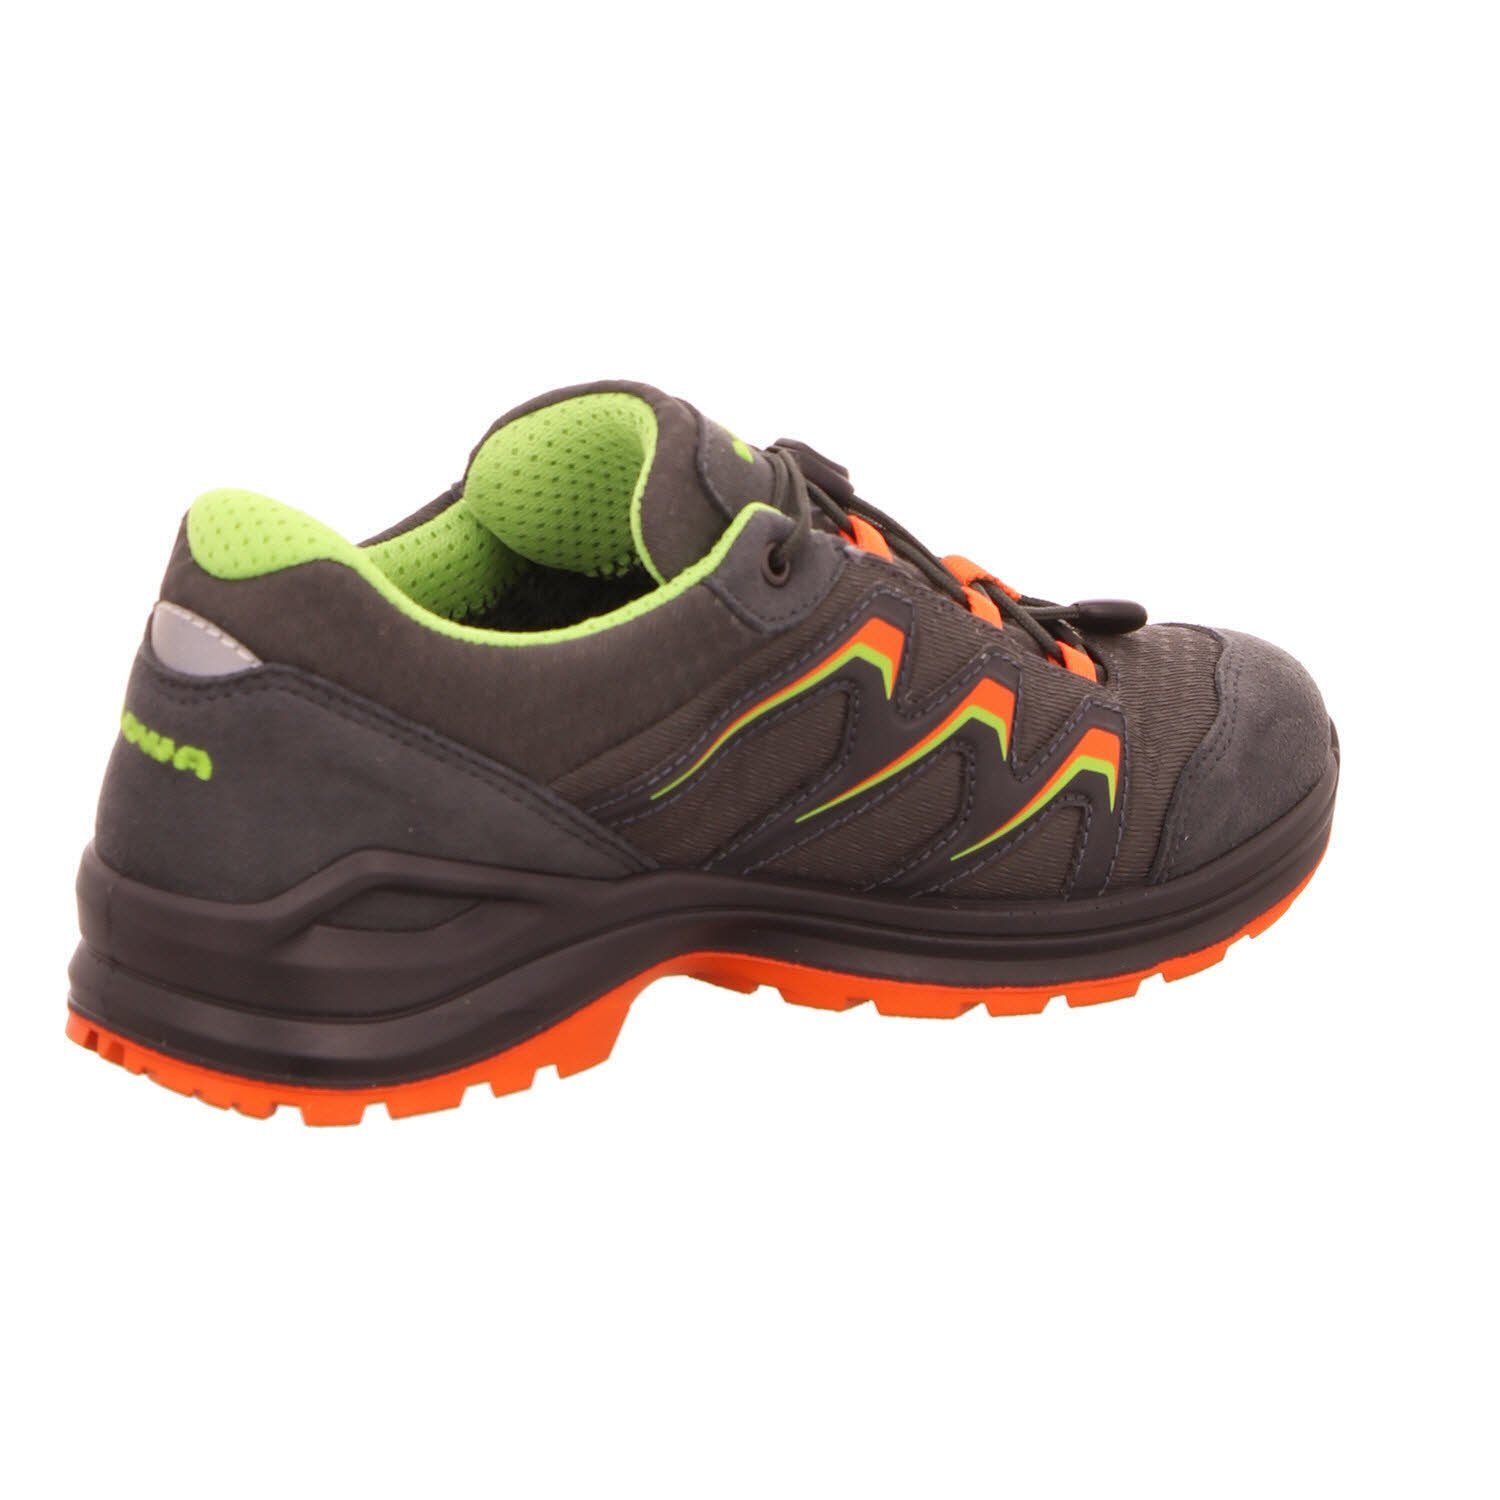 Outdoorschuh Lowa GRAPHIT/FLAME